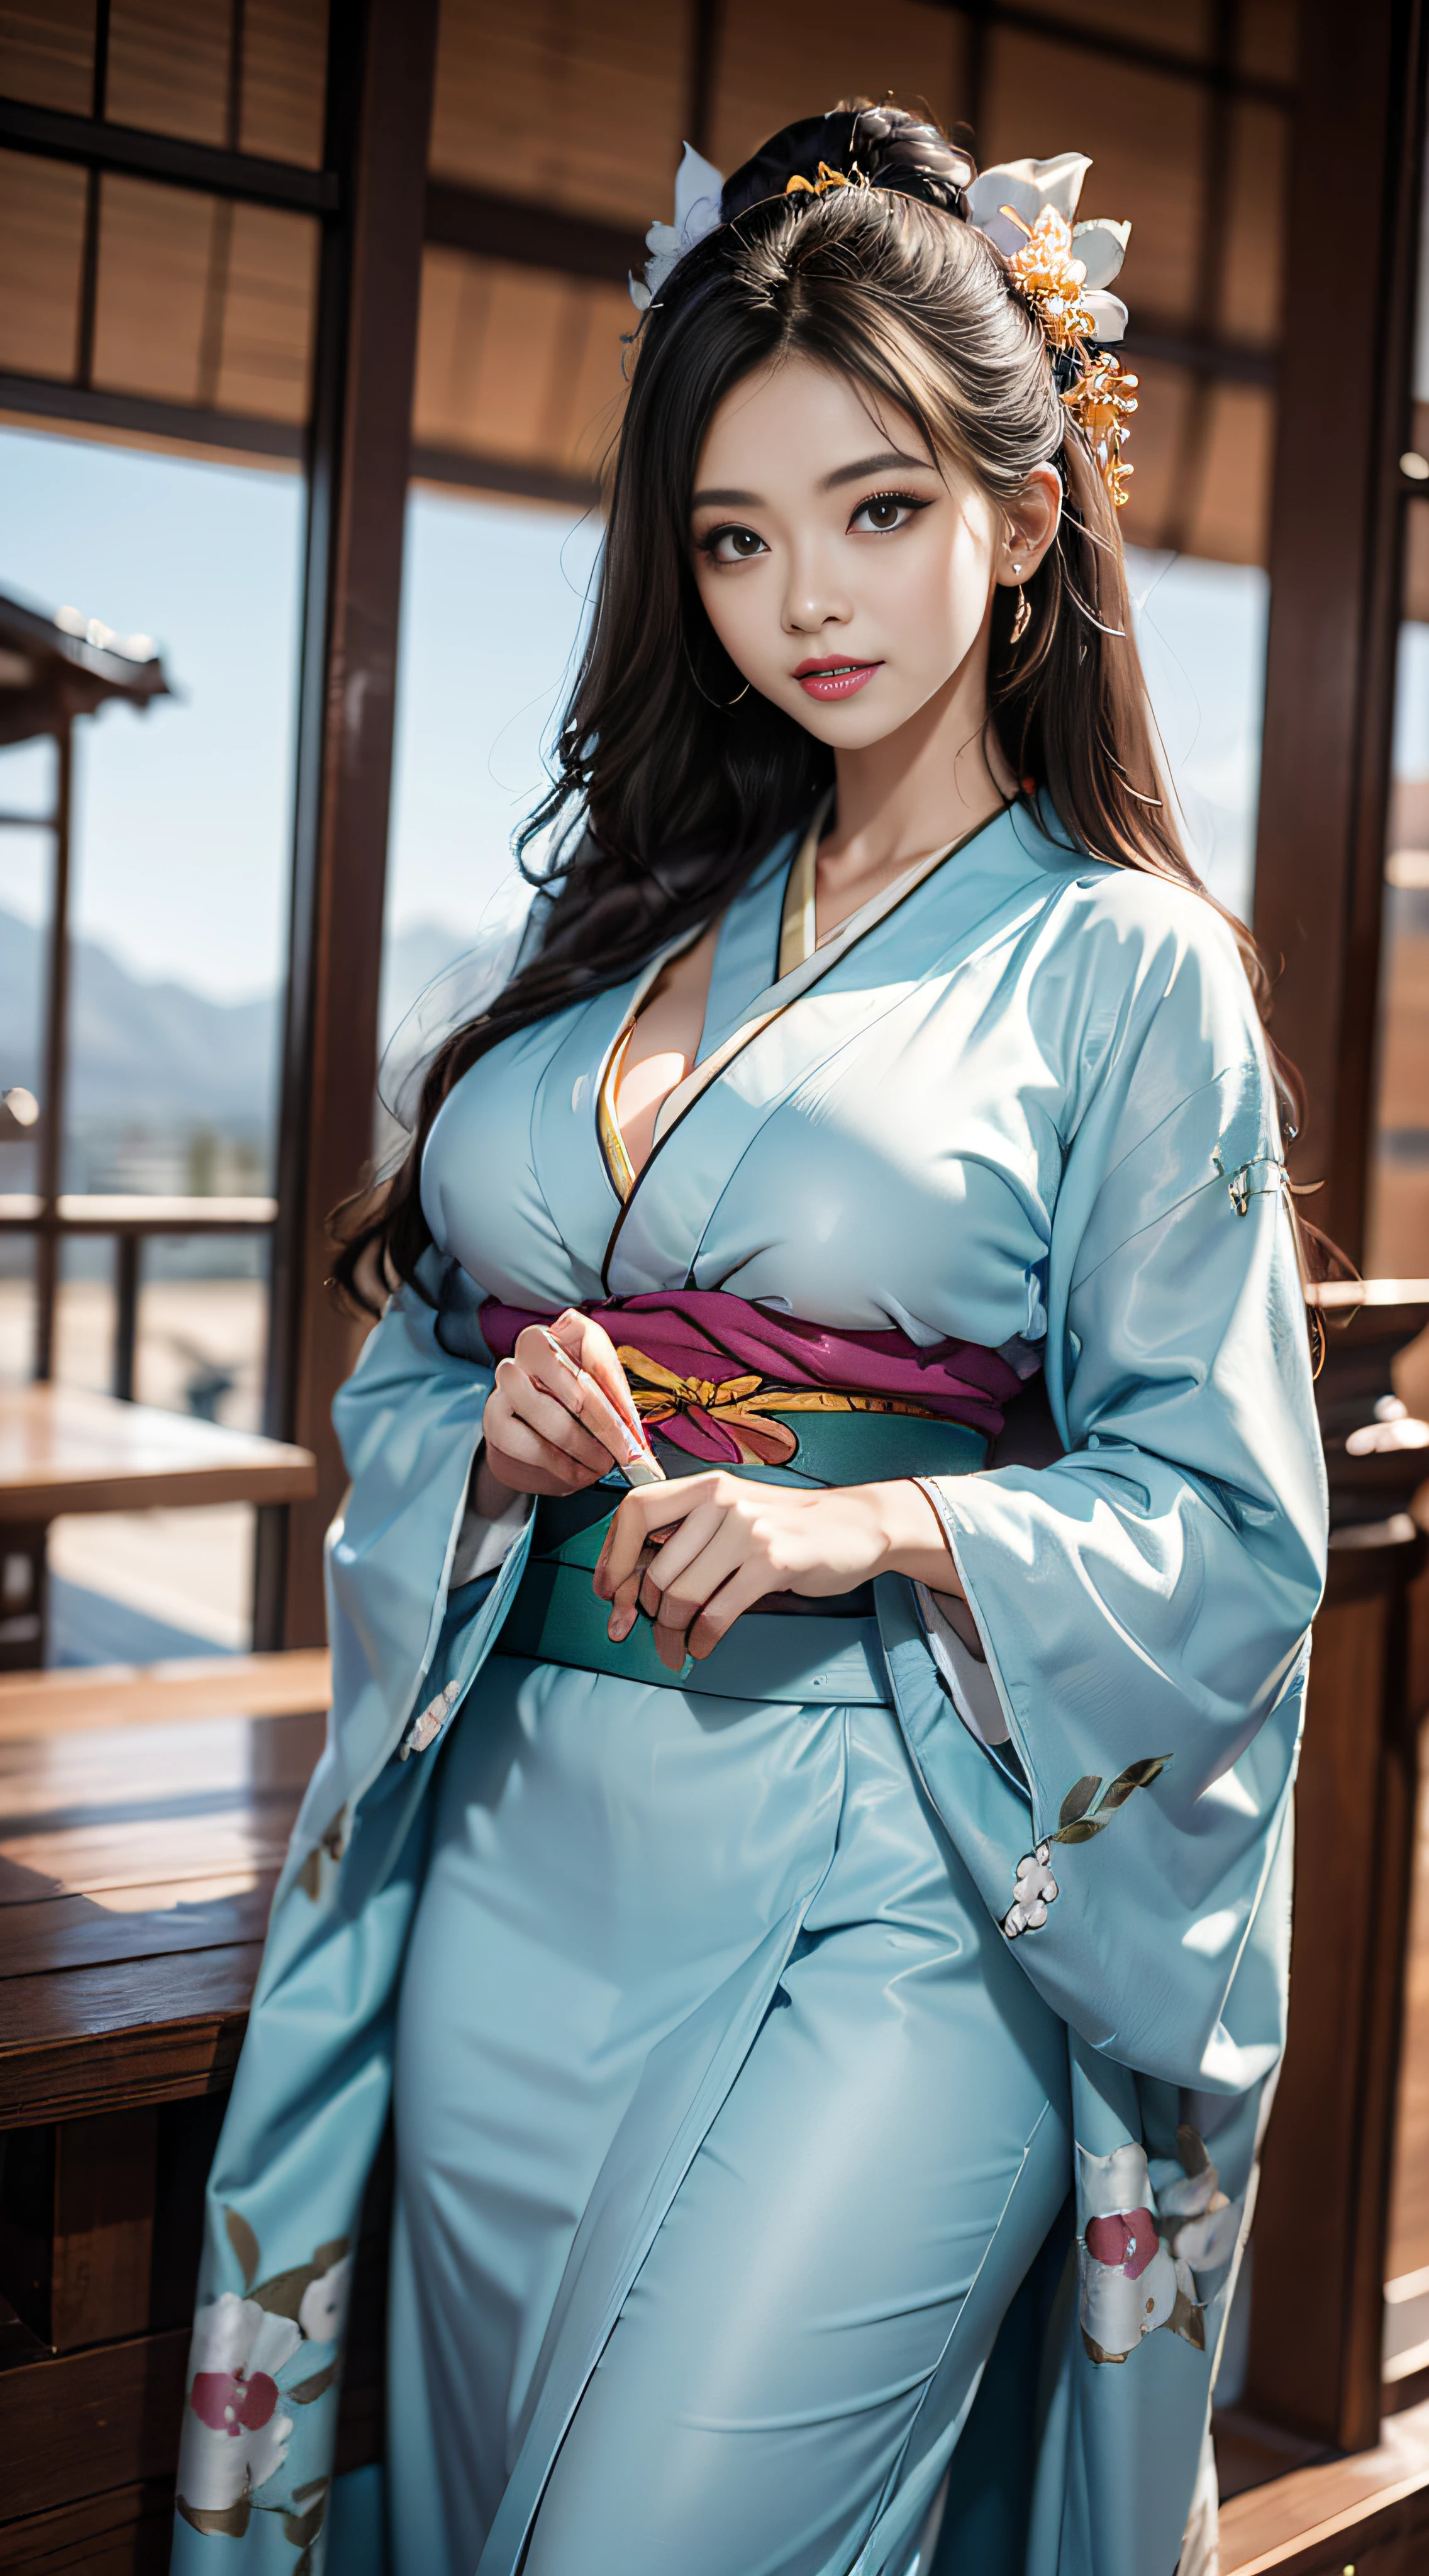 the best qualityt、photorealestic、in 8K、high - resolution、The girls 1 people、a  woman、(Dents in the skin)、(Professional lighting)、(Kimono:1.74)、luxury、(((Big Chest、Narrow waist)))、(Girl looking at viewer one eye:1.54)、((Watching the viewer:1.6)) 、(is looking at the camera)、photorealestic、(bokeh feeling)、(dinamic pose:1.2)、A masterpie、intricate、Realstic、sharpening Focus、award-winning photo、Sorrisos